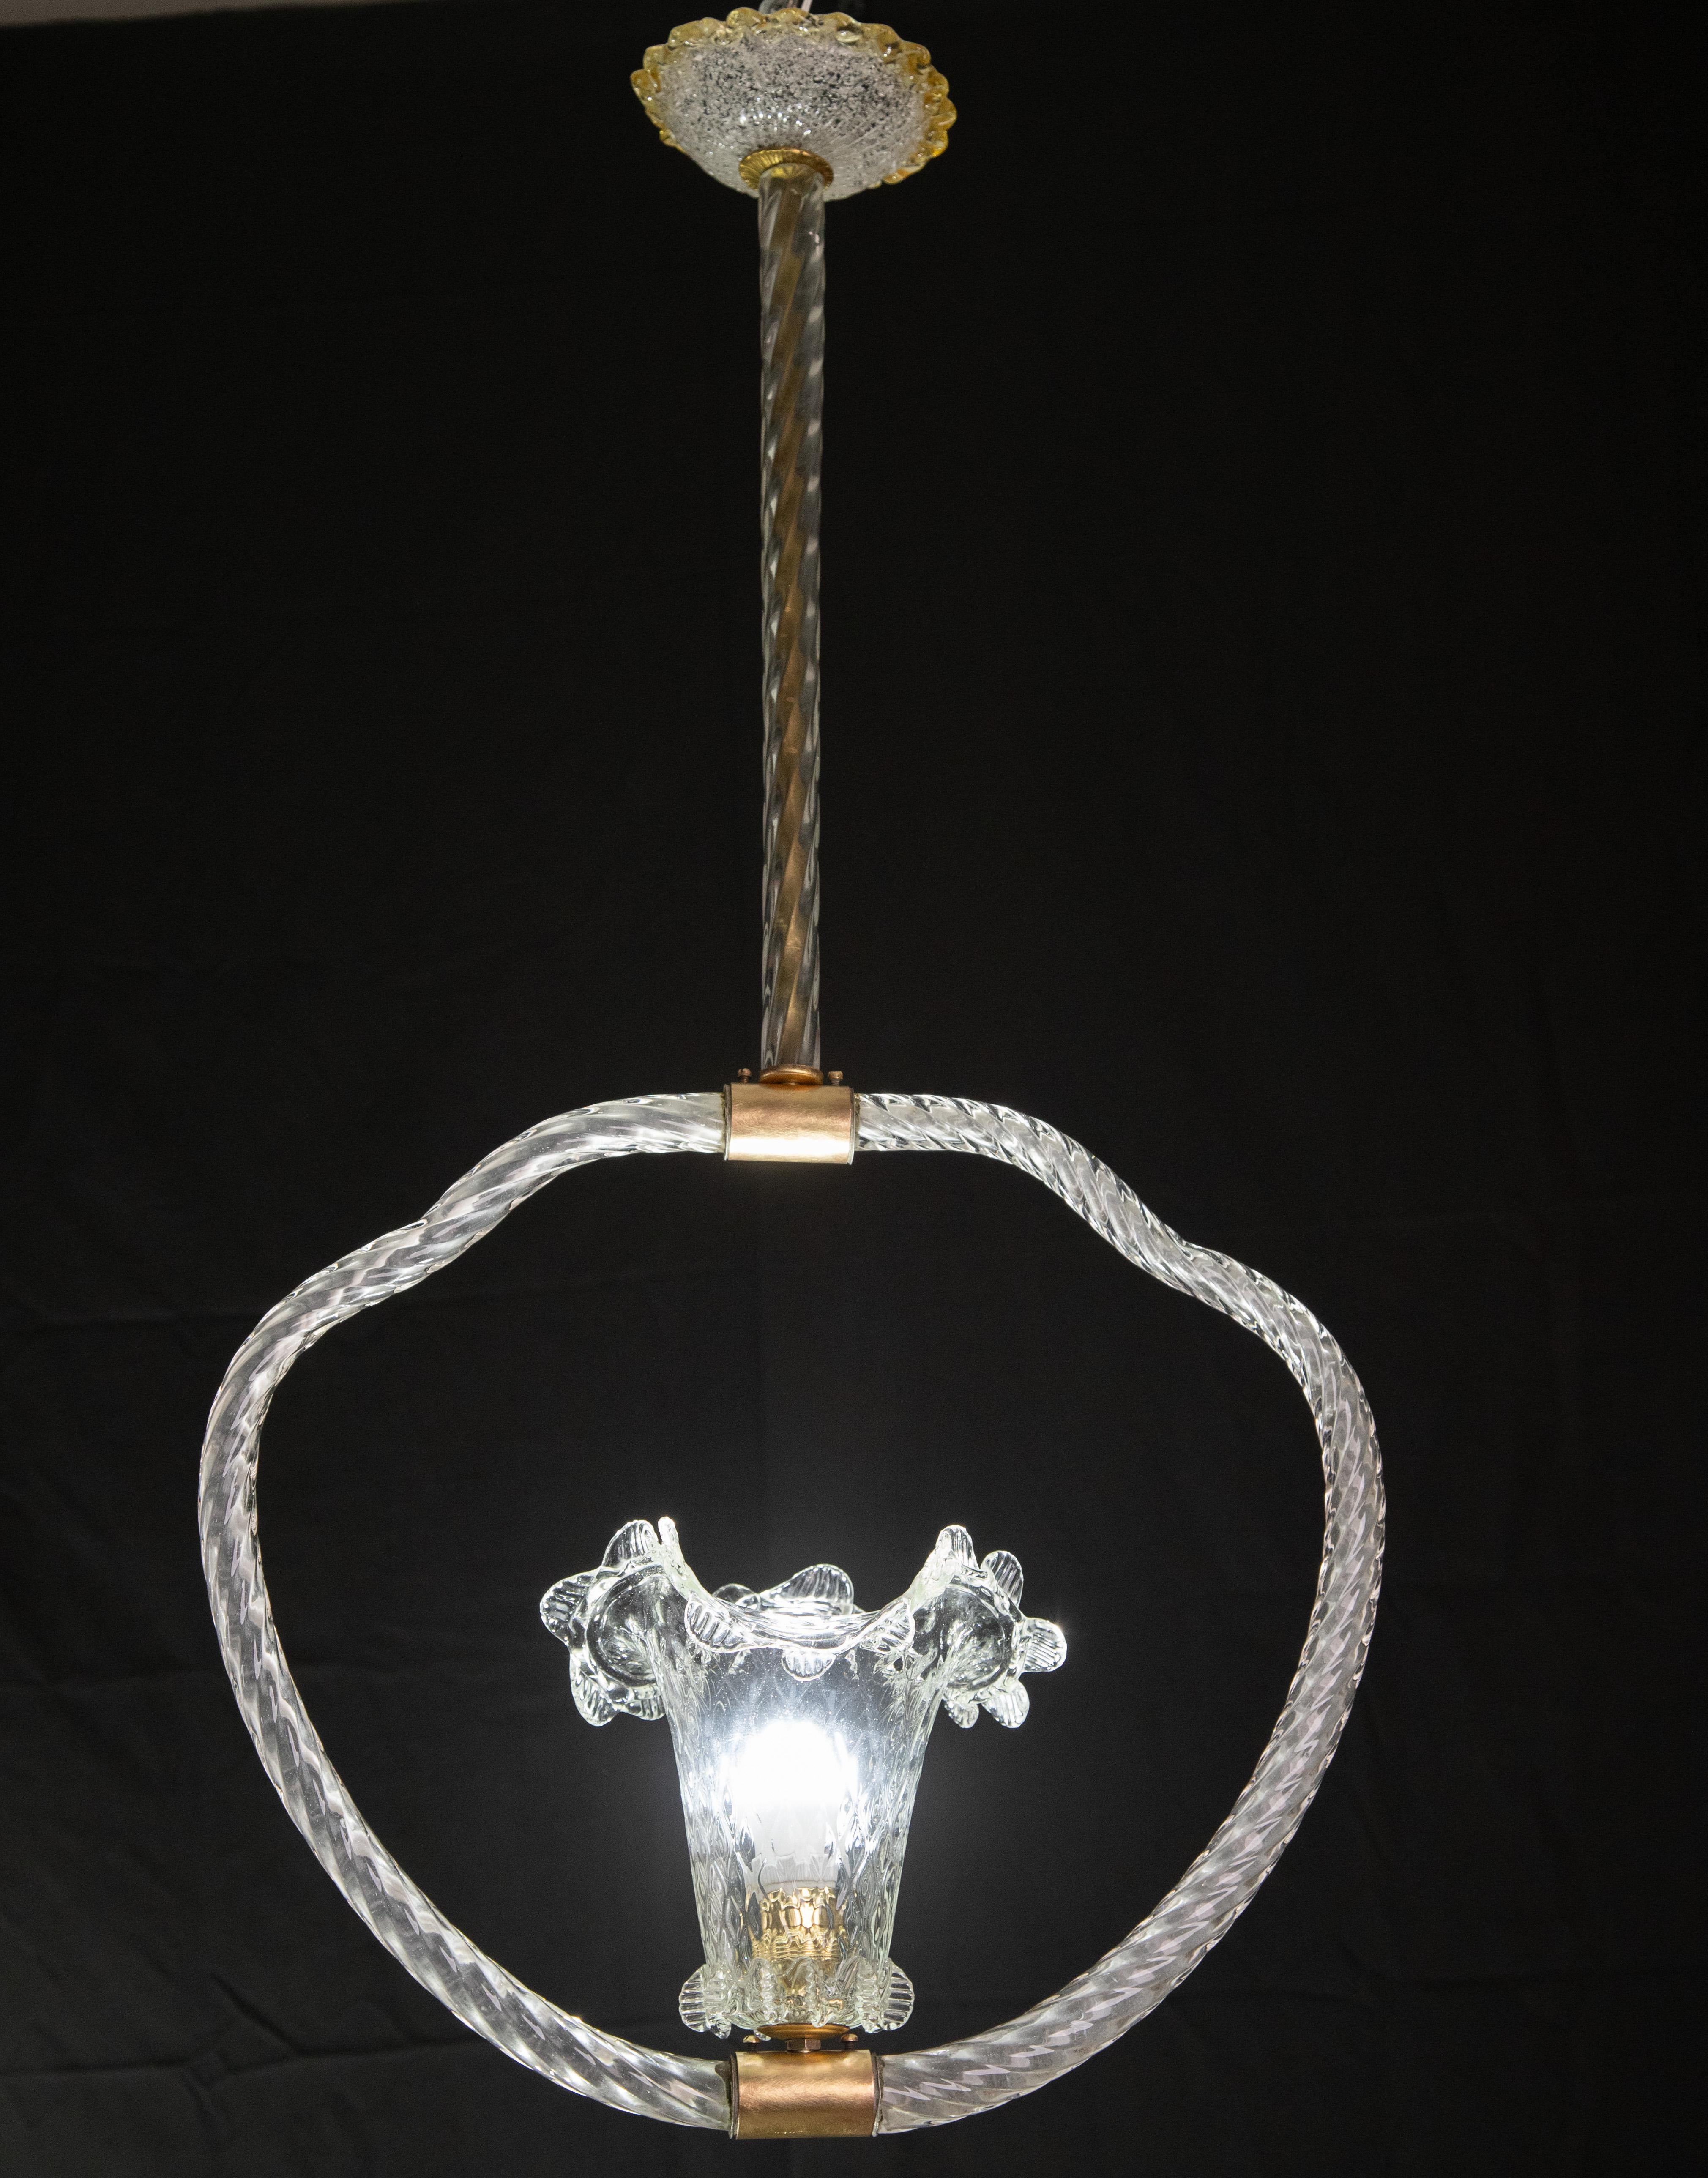 Splendid Art Deco style pendant made by the Barovier & Toso glassworks in the 1940s-1950s. The chandelier is 90cm high with the rod, 48cm wide. Mount an E27 light. 